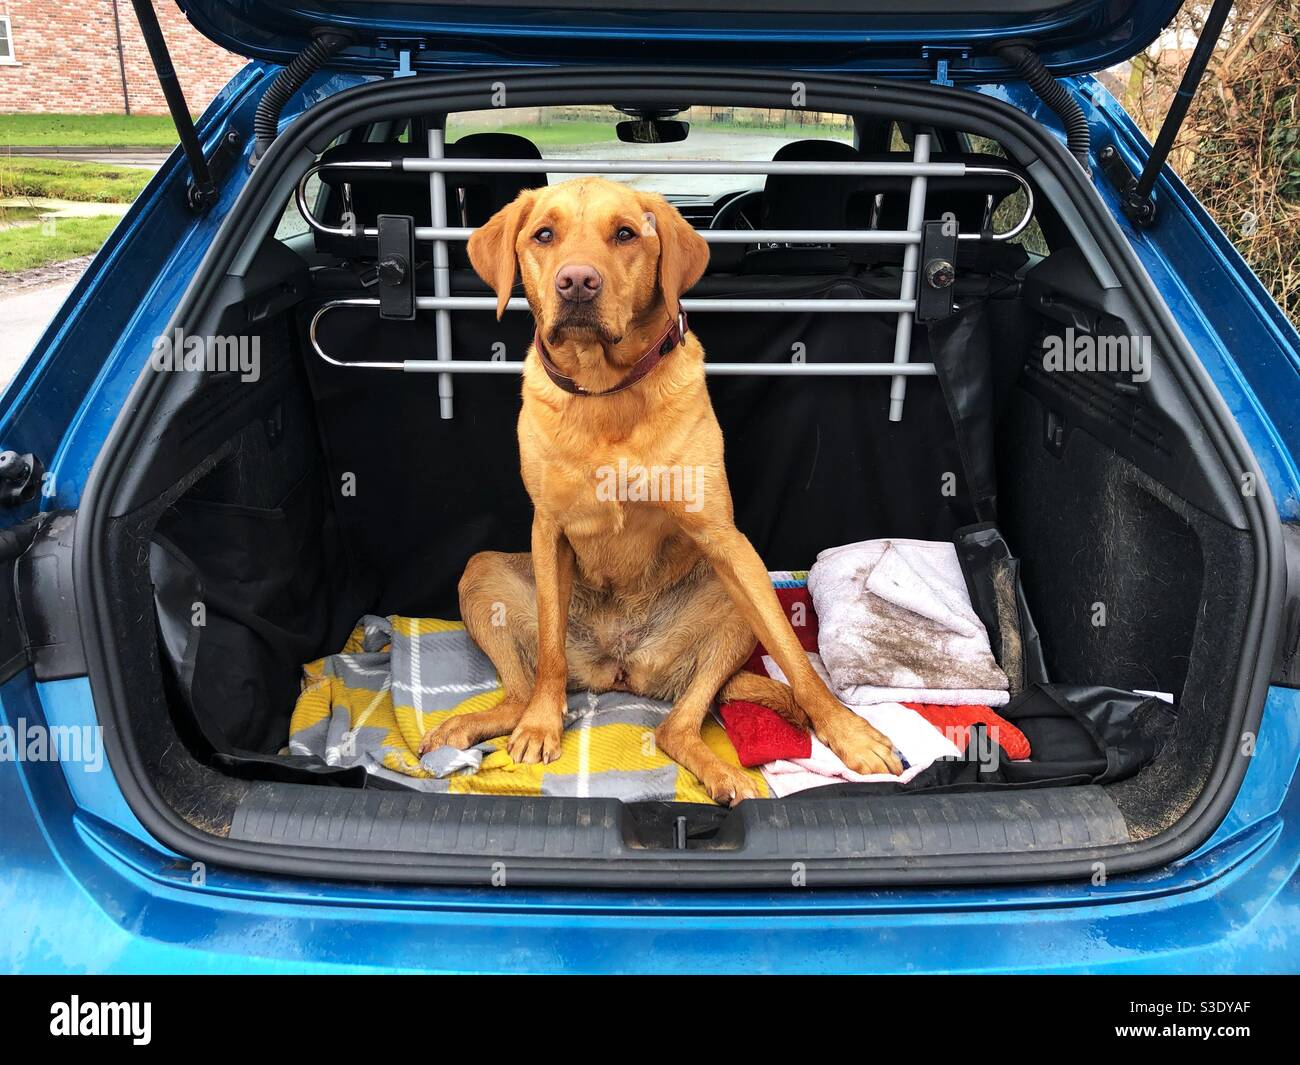 A funny image of a pet Labrador retriever dog sitting relaxed in the boot of a car after a dog walk Stock Photo